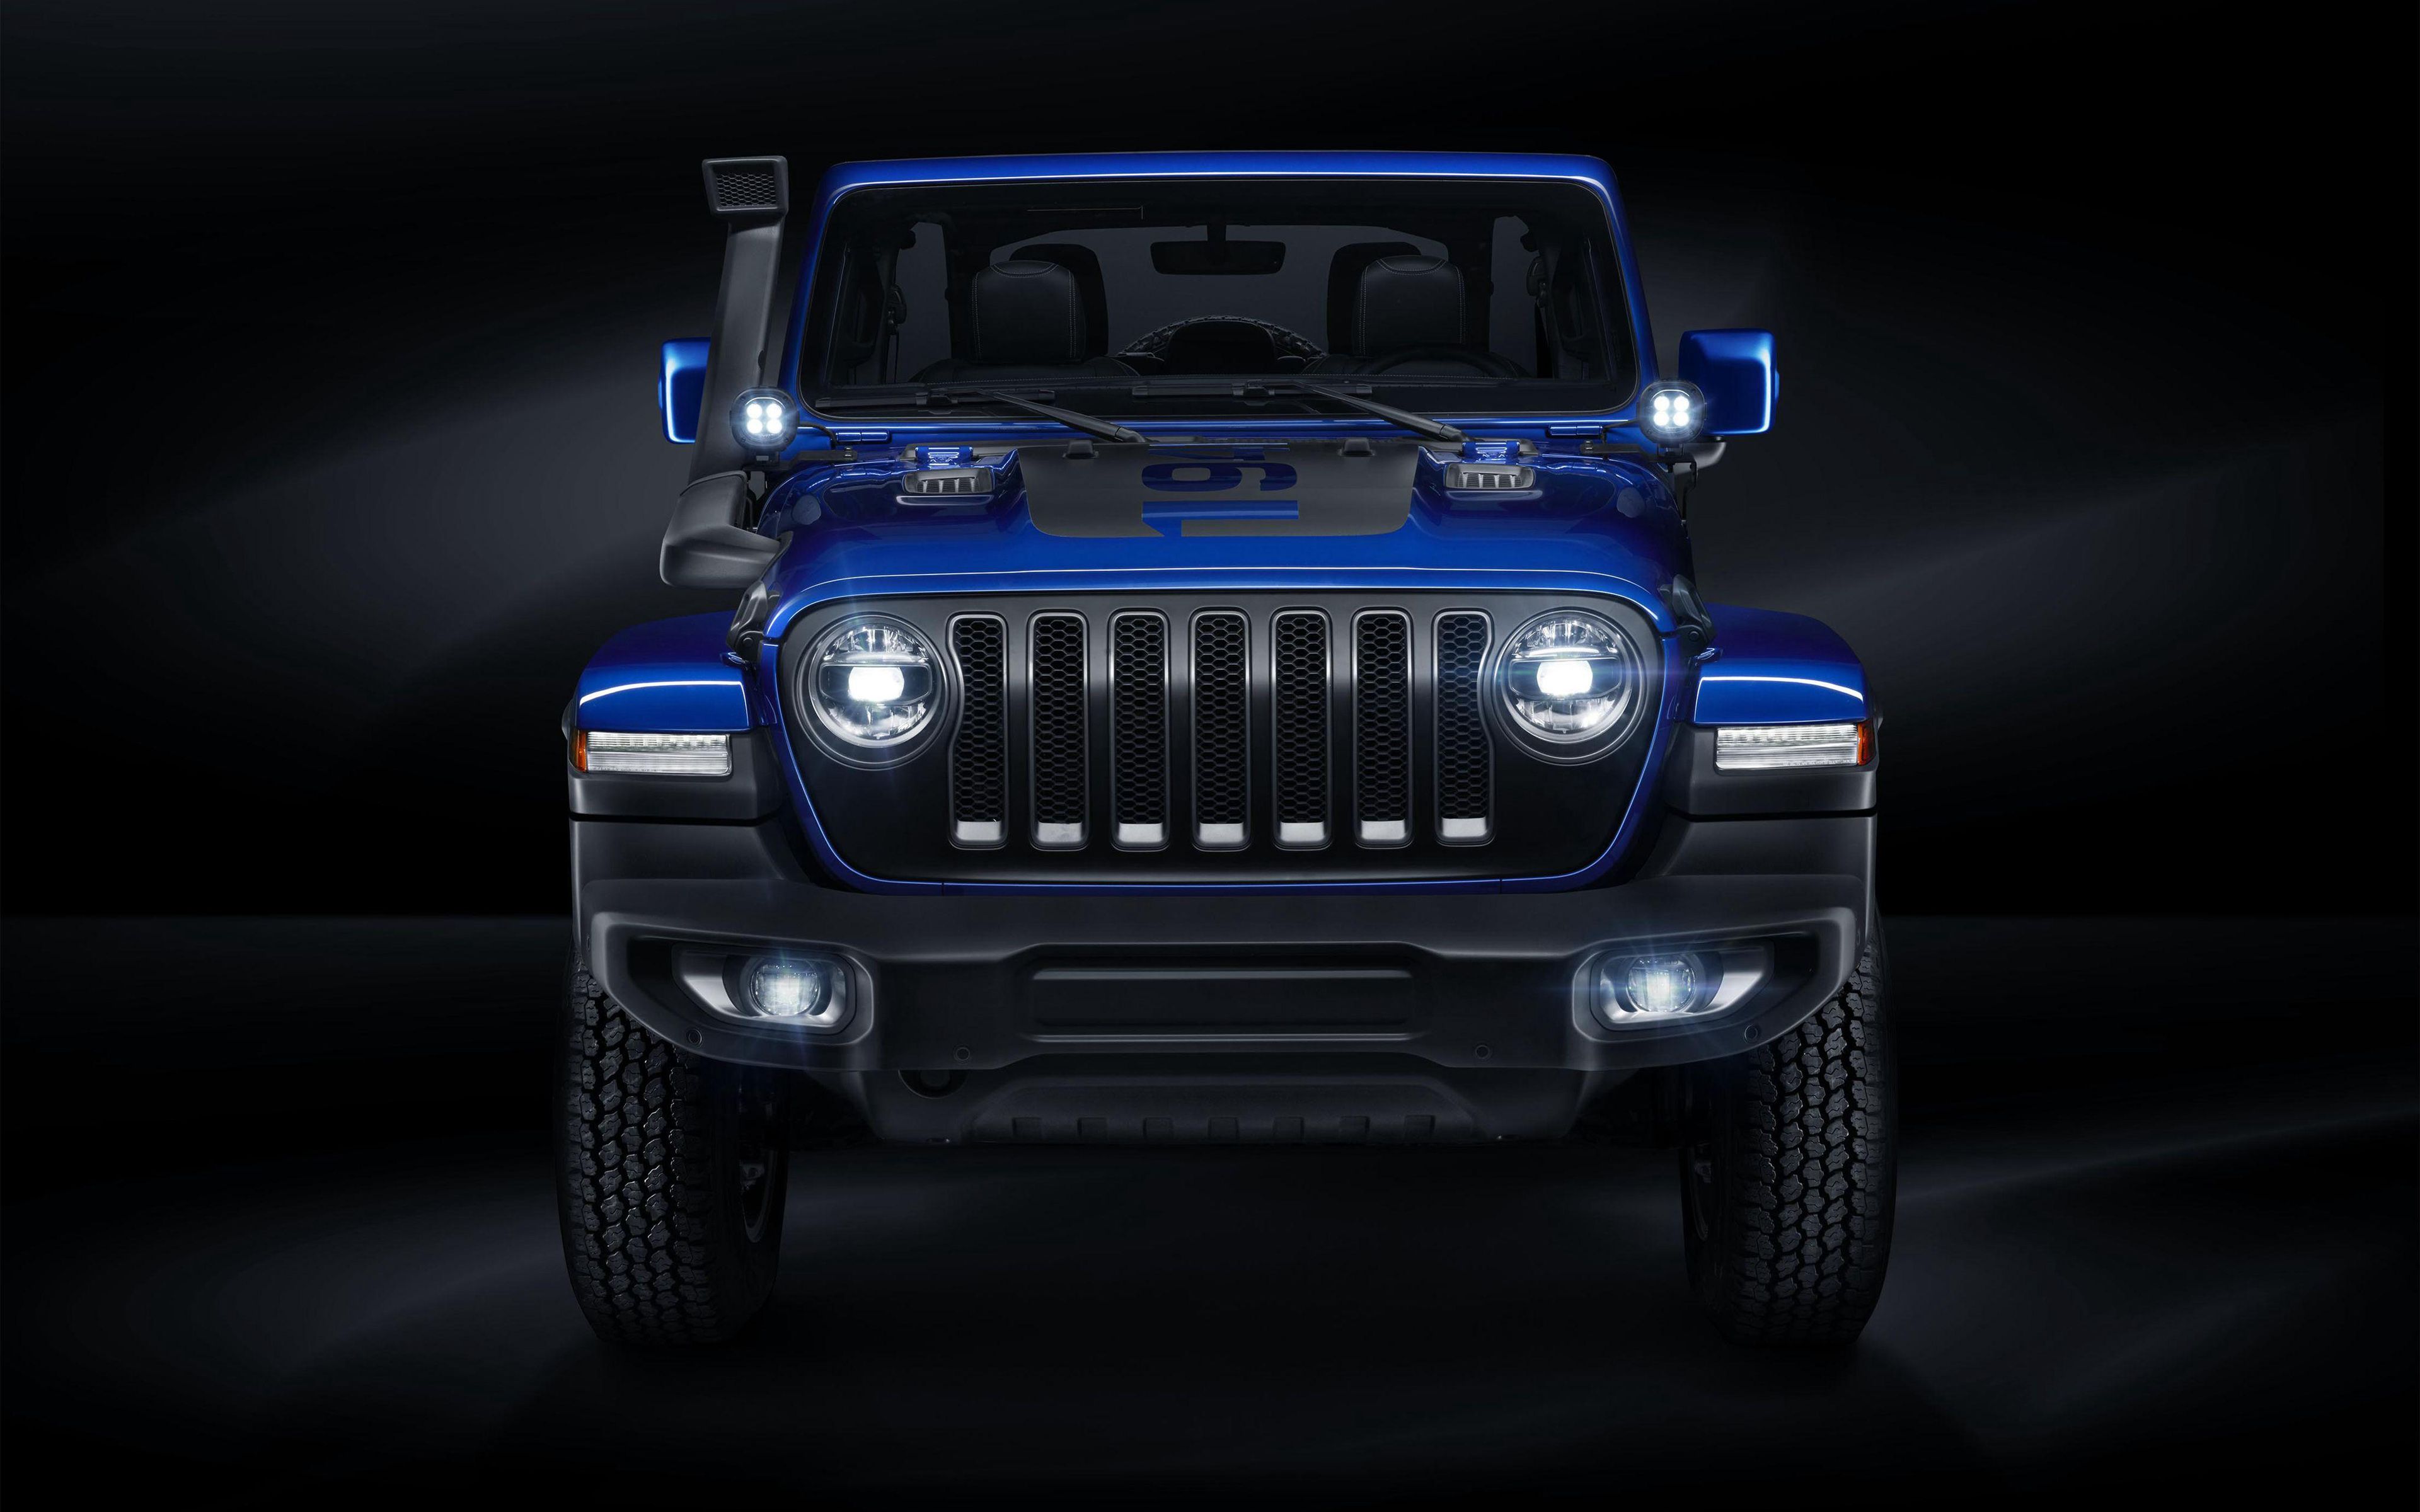 Download wallpaper Jeep Wrangler Unlimited Moparized, 4k, 2018 cars, SUVs, blue jeep, studio, Jeep Wrangler, Jeep for desktop with resolution 3840x2400. High Quality HD picture wallpaper